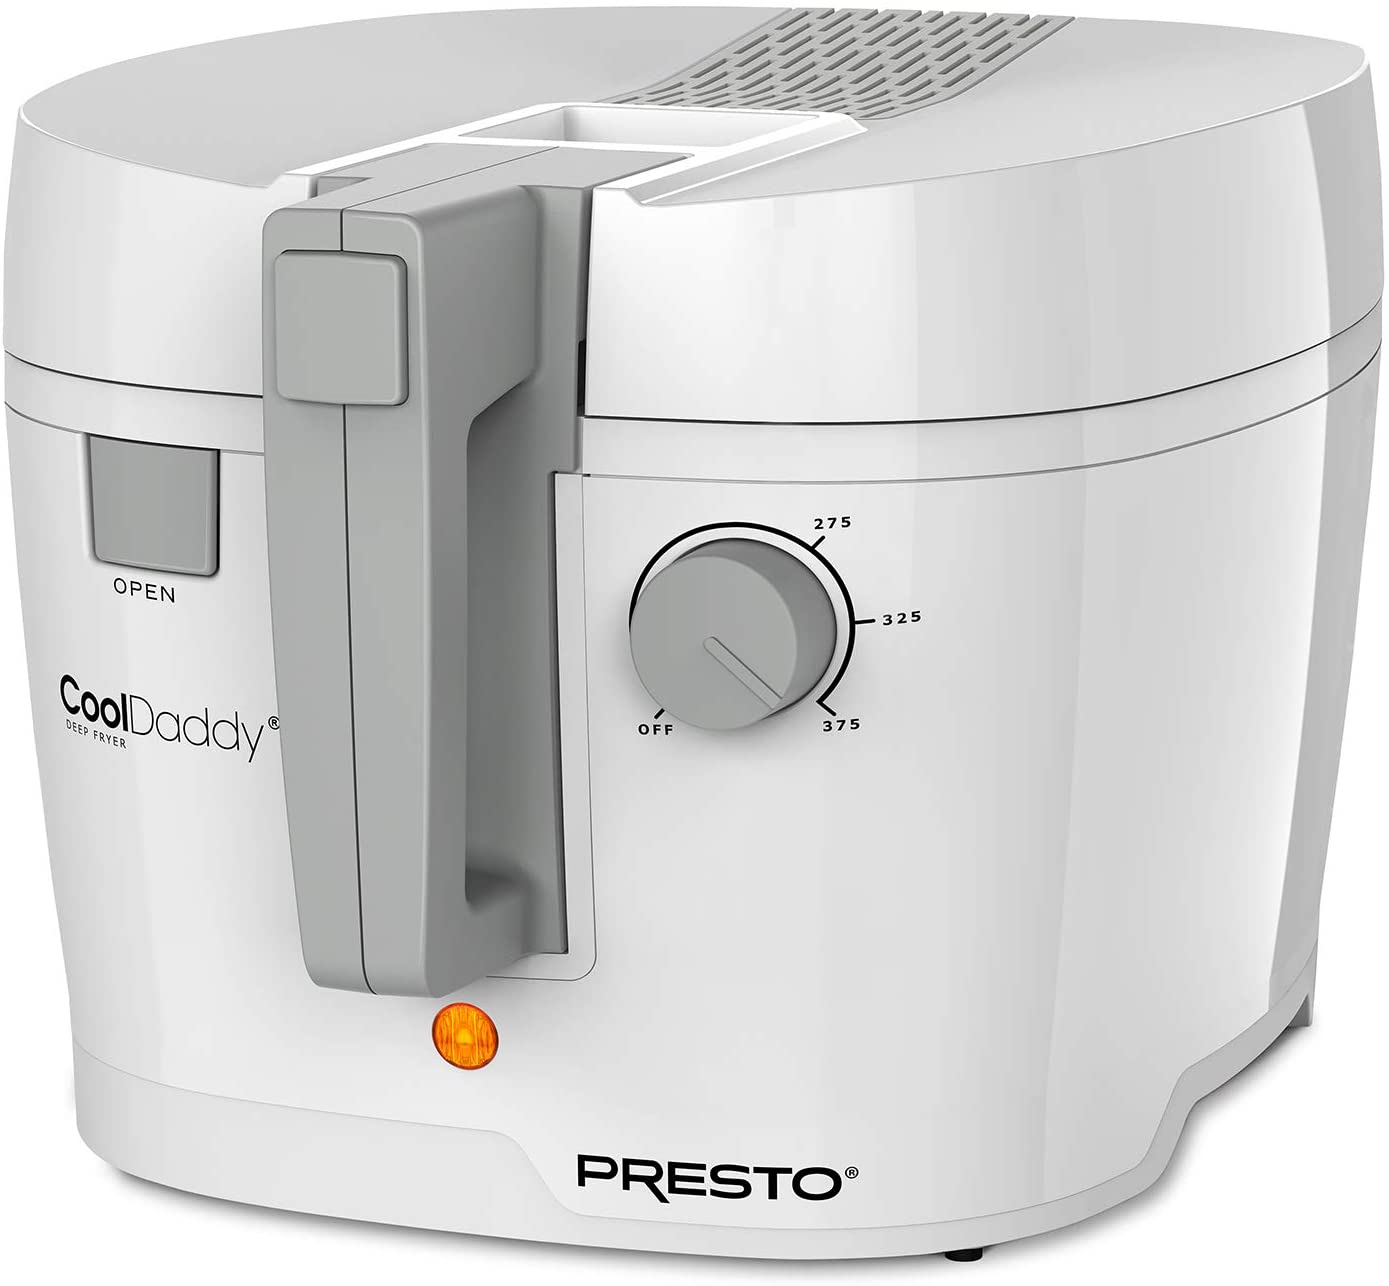 Review of Presto 05443 CoolDaddy Cool-touch Deep Fryer - White